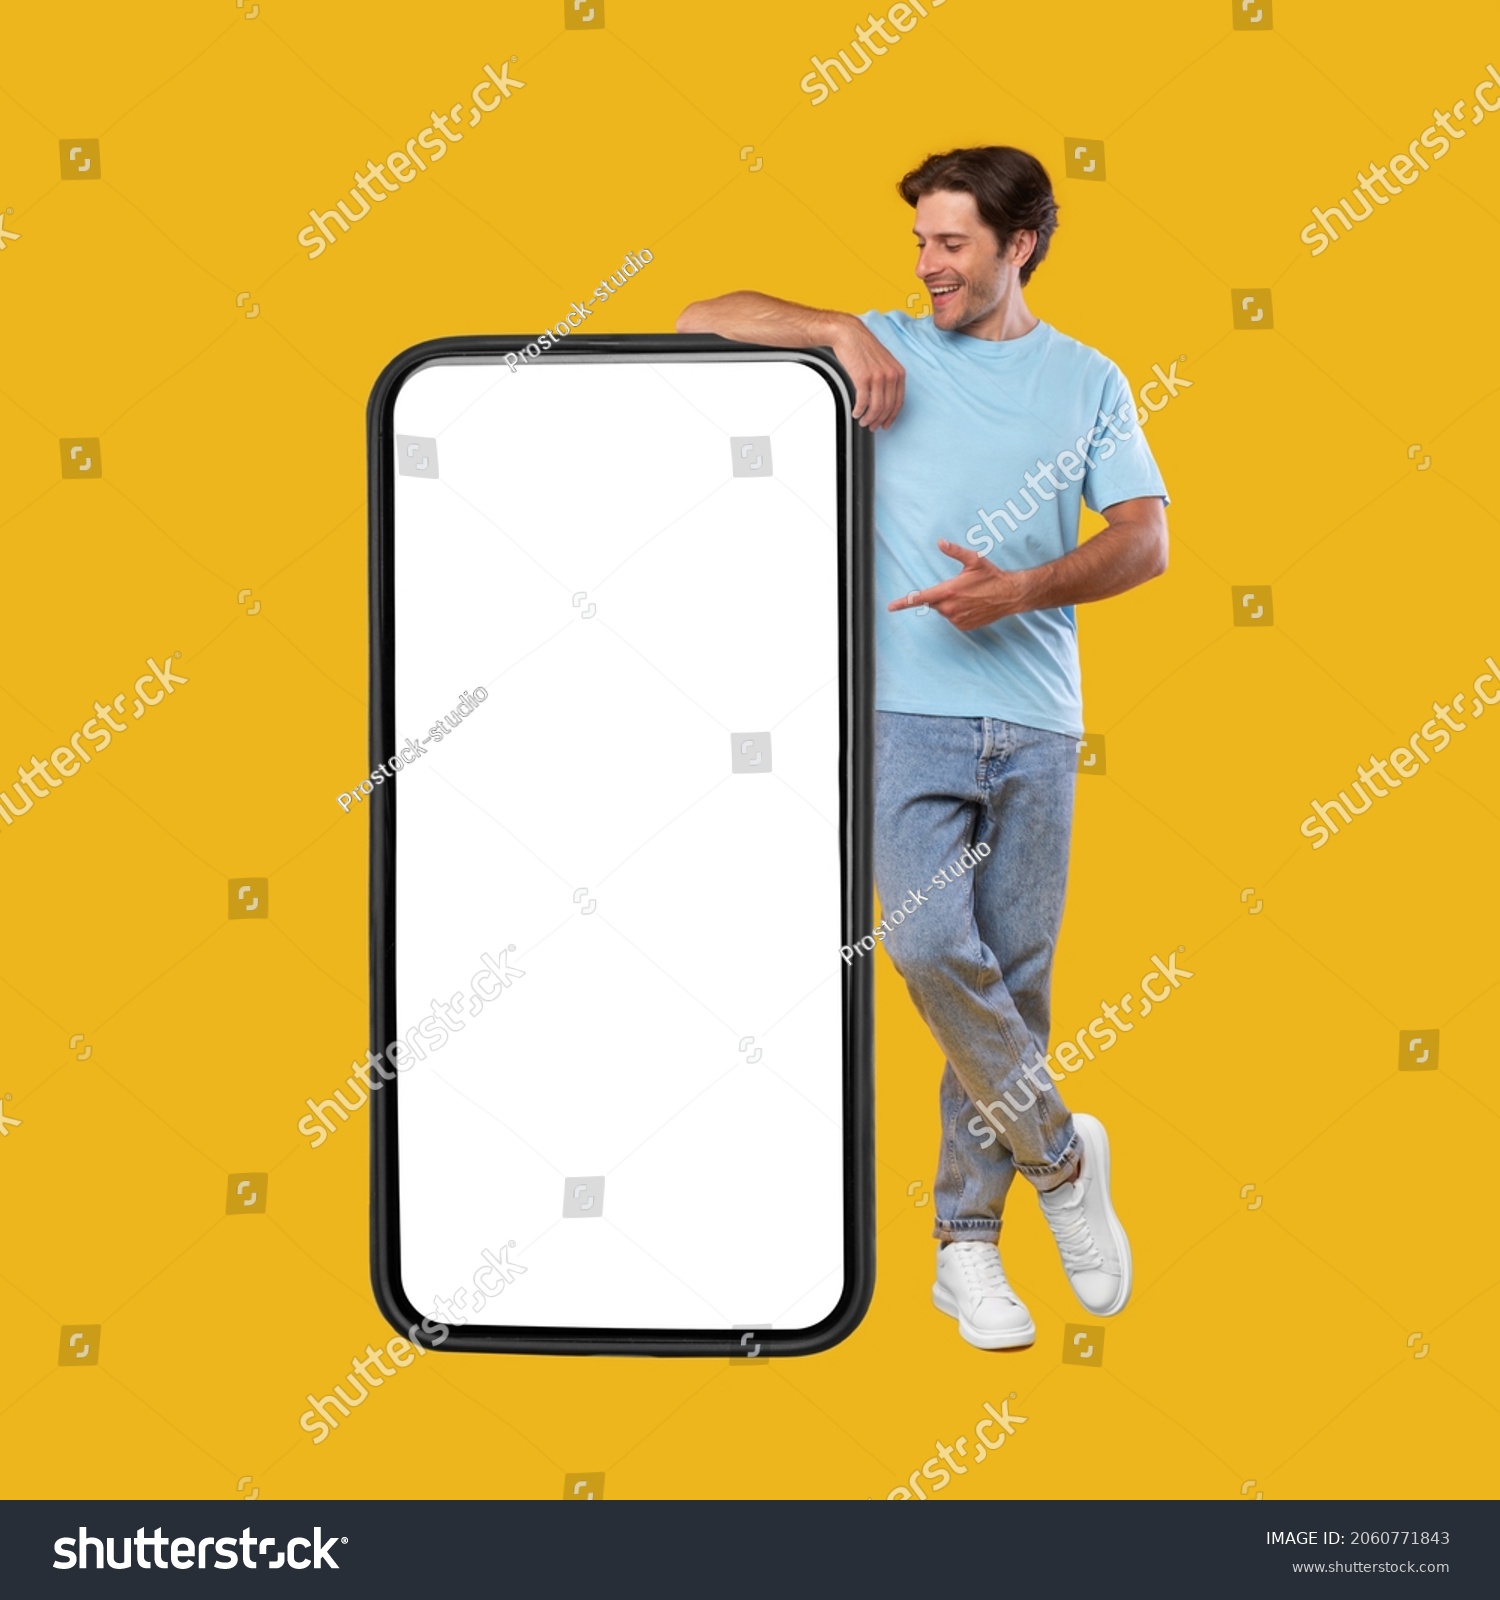 Mobile App Advertisement. Full Body Length Of Happy Man Leaning And Pointing At Big Huge White Empty Smartphone Screen Standing On Orange Studio Background. Check This Out, Cellphone Display Mock Up #2060771843